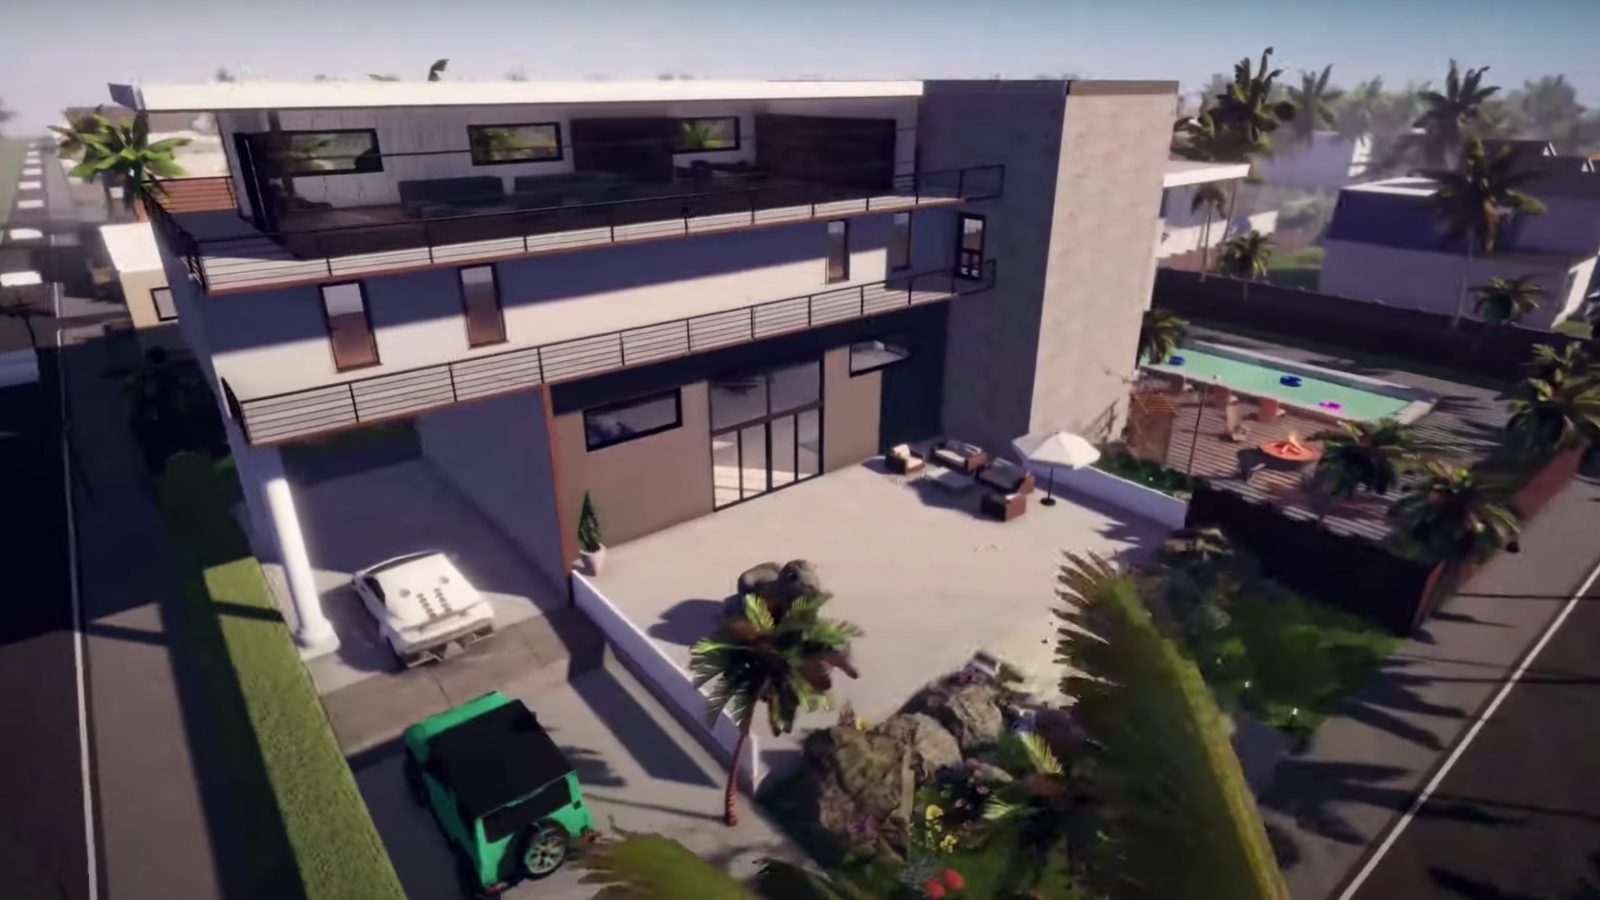 The Isn’t Company Announces House Building PC Game Hometopia